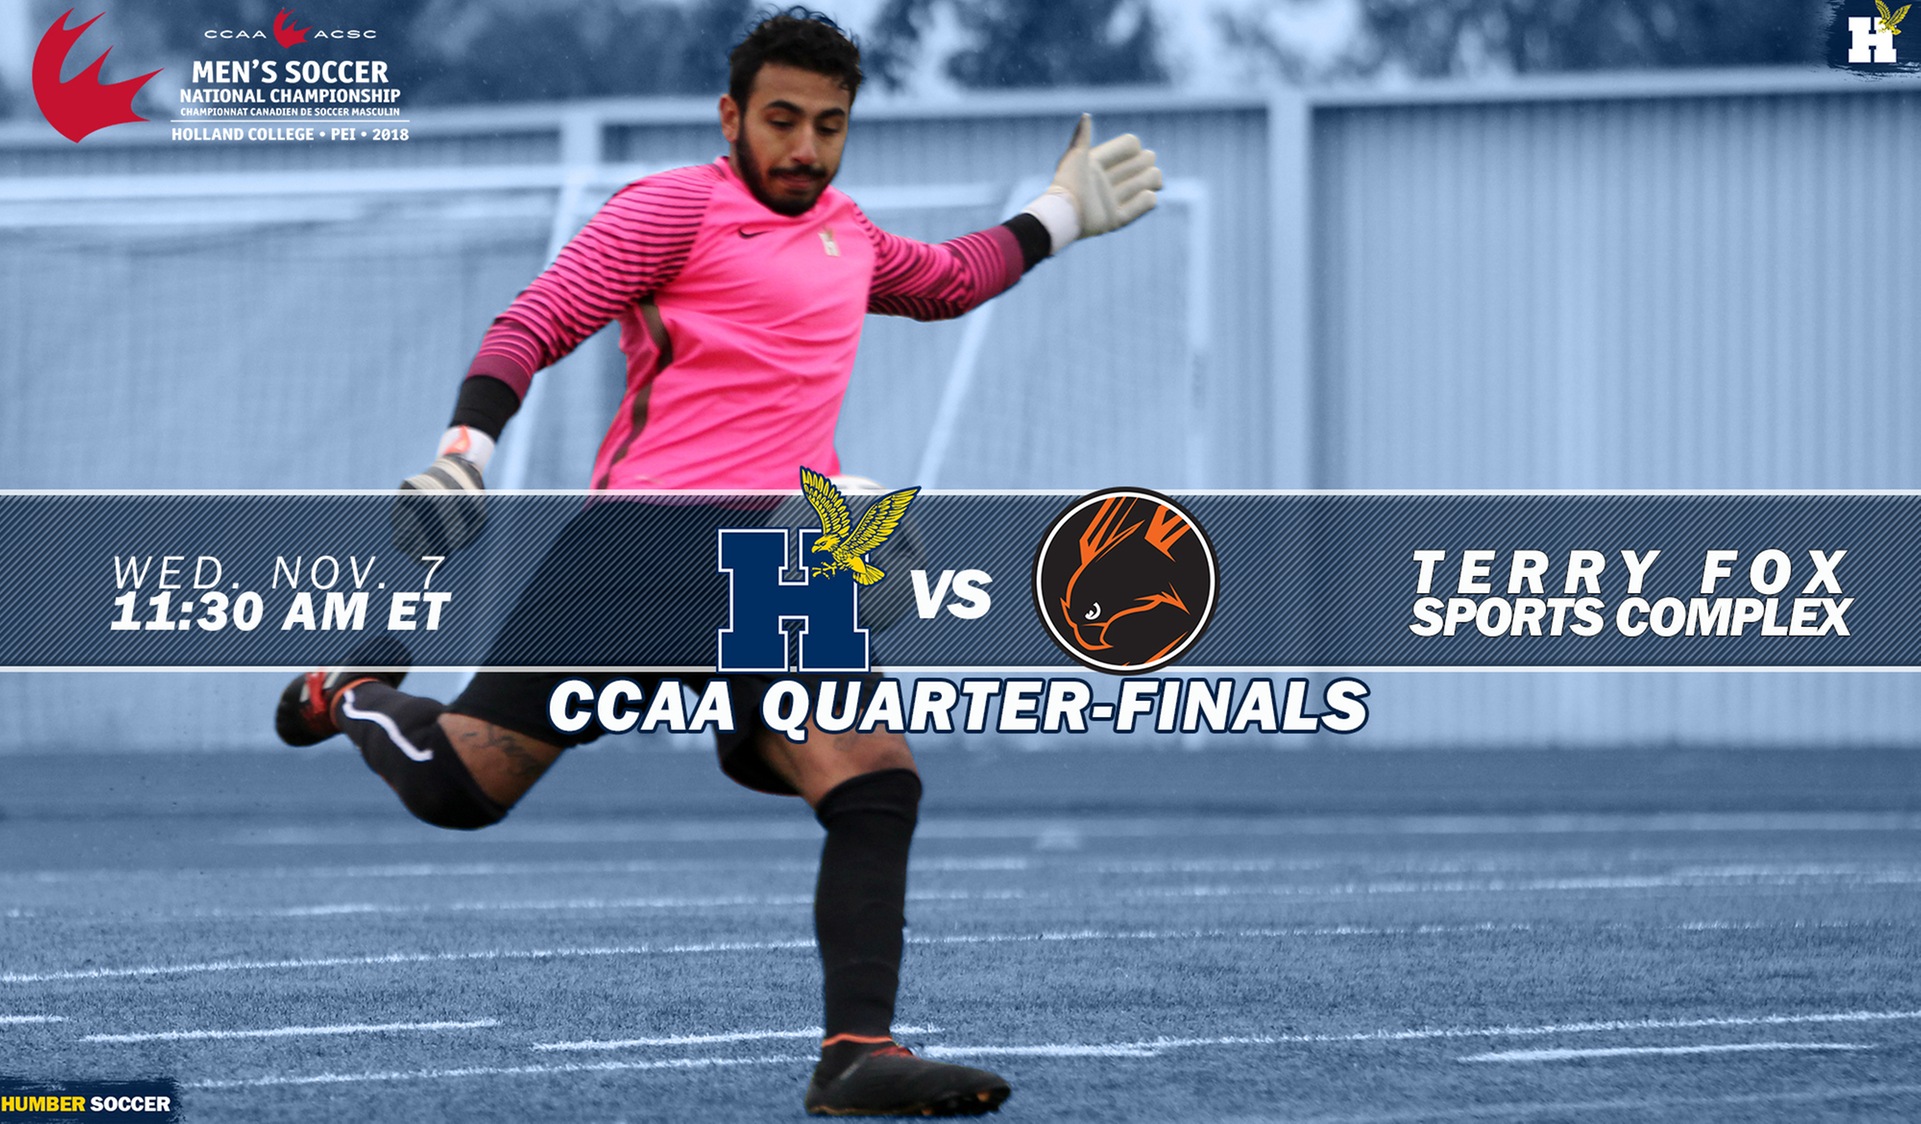 MEN'S SOCCER HEADING TO PEI IN SEARCH OF SEVENTH NATIONAL TITLE